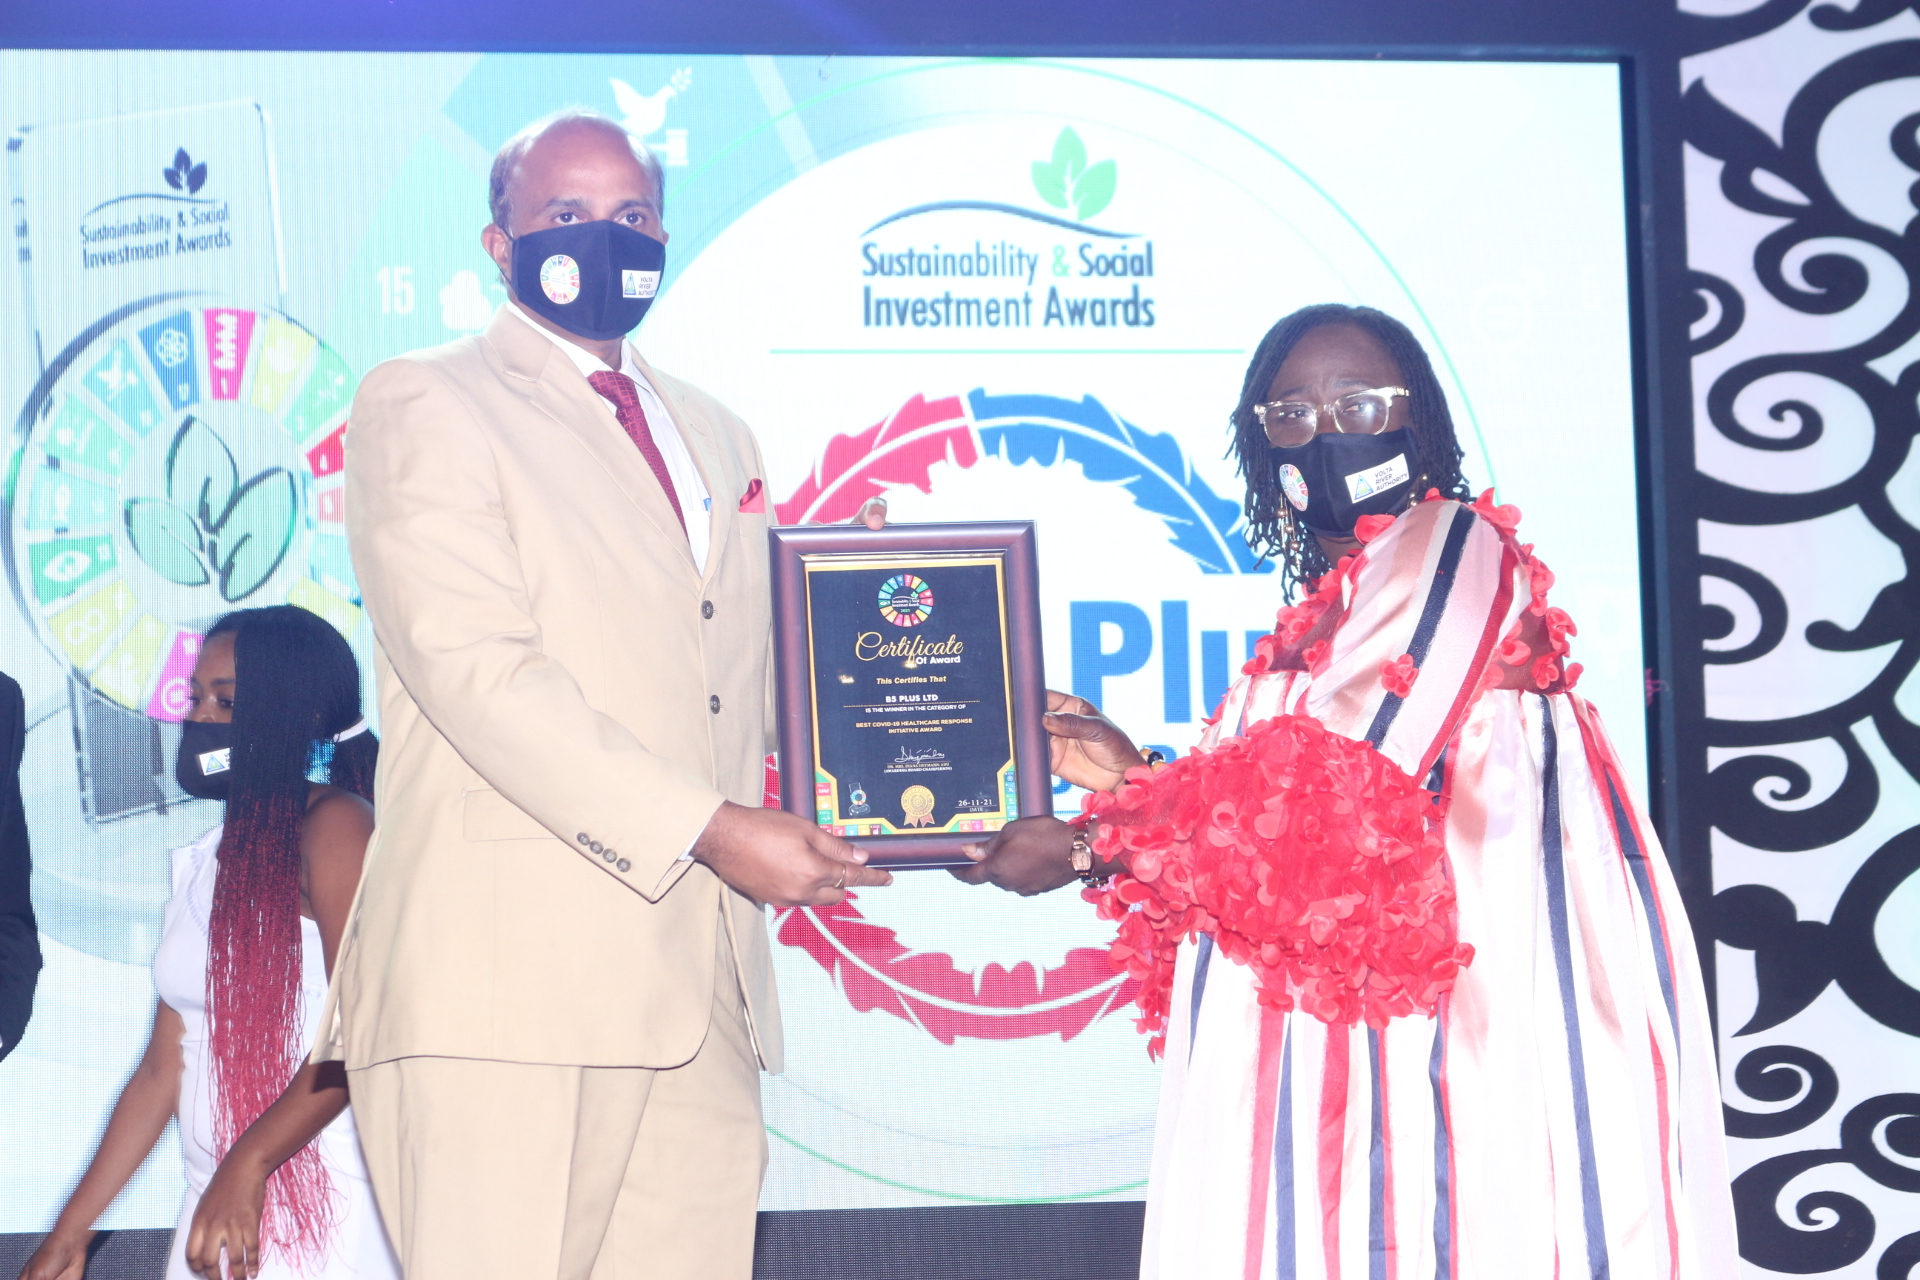 B5 Plus Limited gets top awards in Ghana for investment and CSR initiatives